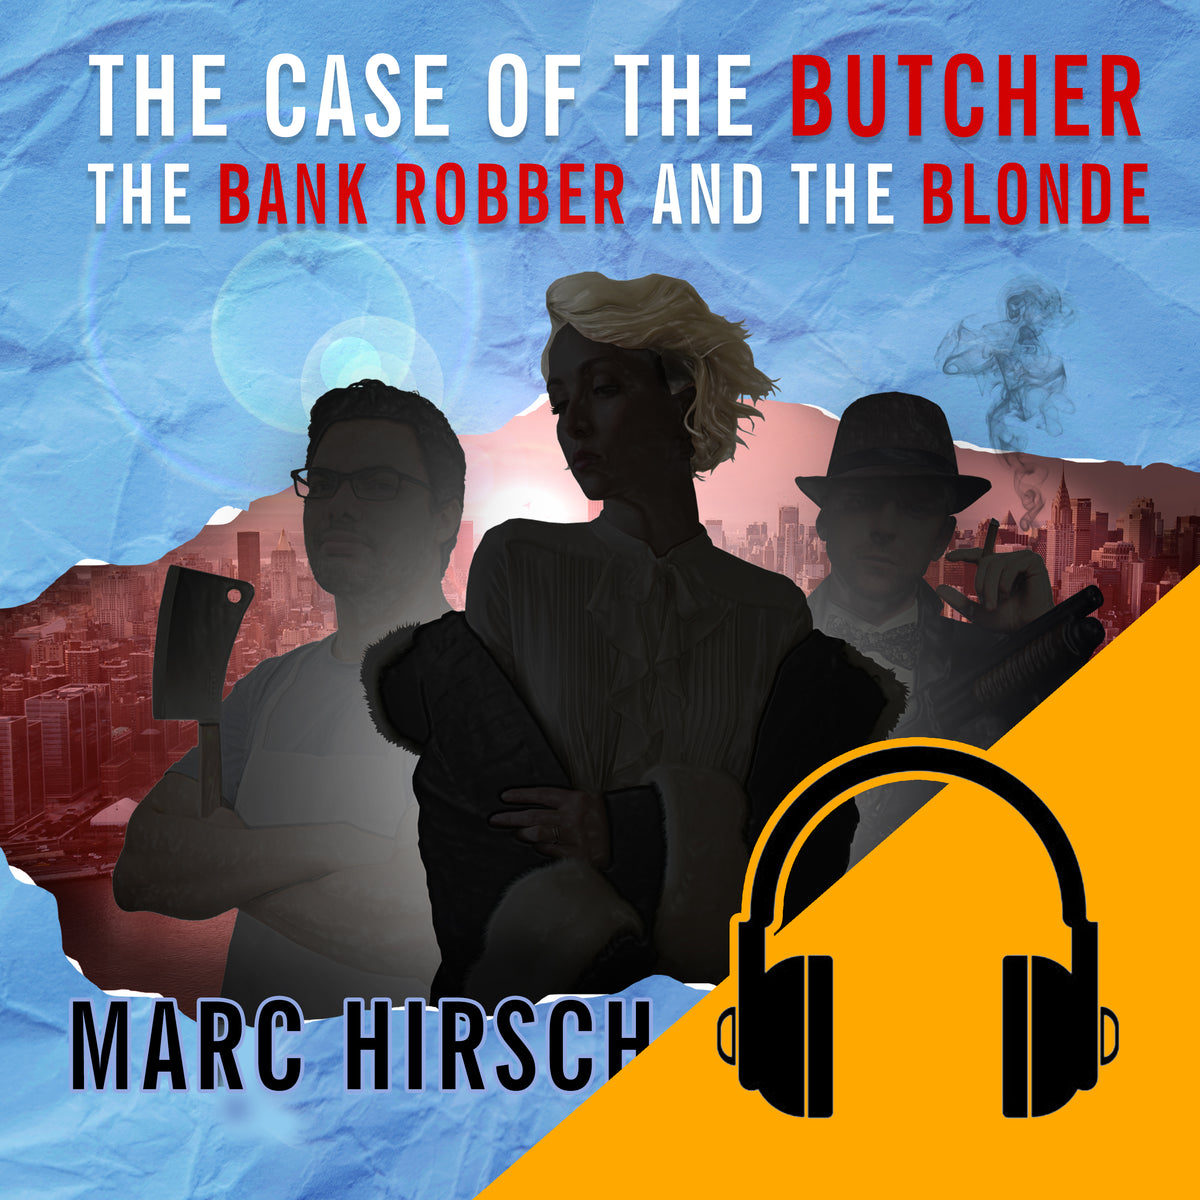 AUDIOBOOK: The Case of the Butcher, the Bank Robber, and the Blonde: Alice White Investigator Series Book 4